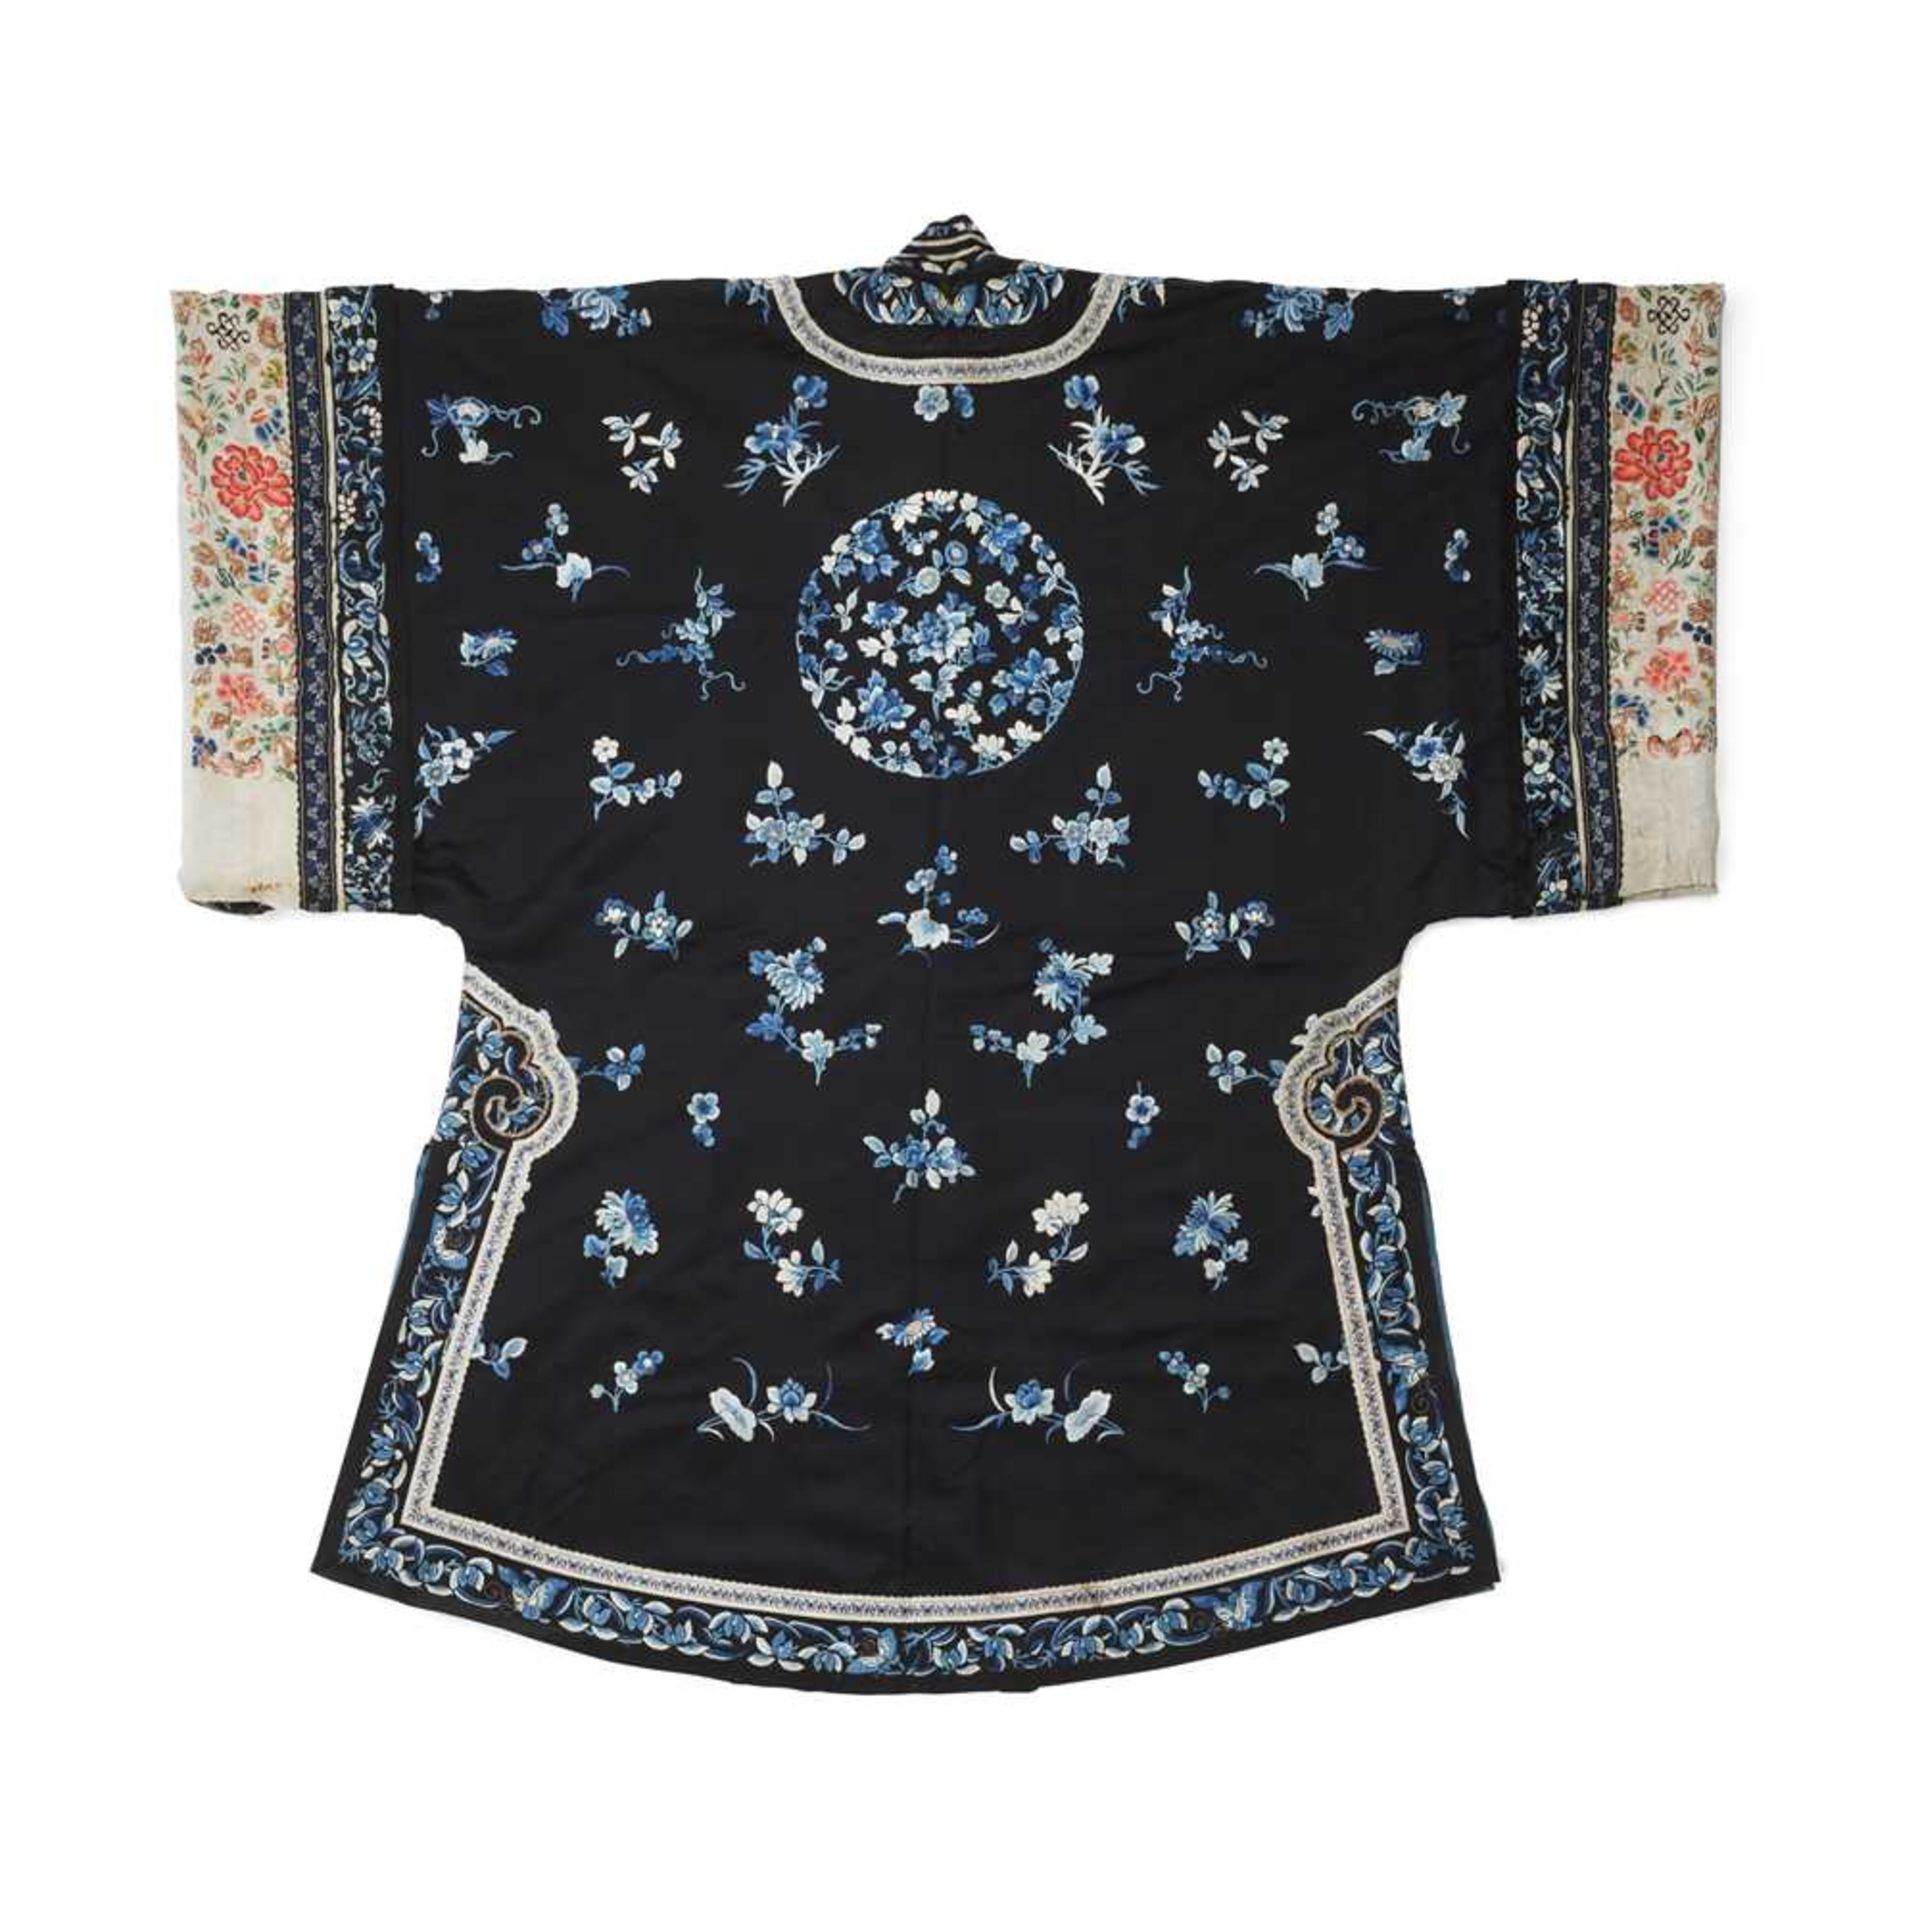 BLACK-GROUND SILK EMBROIDERED LADY'S OVERCOAT LATE QING DYNASTY-REPUBLIC PERIOD, 19TH-20TH CENTURY - Bild 2 aus 2